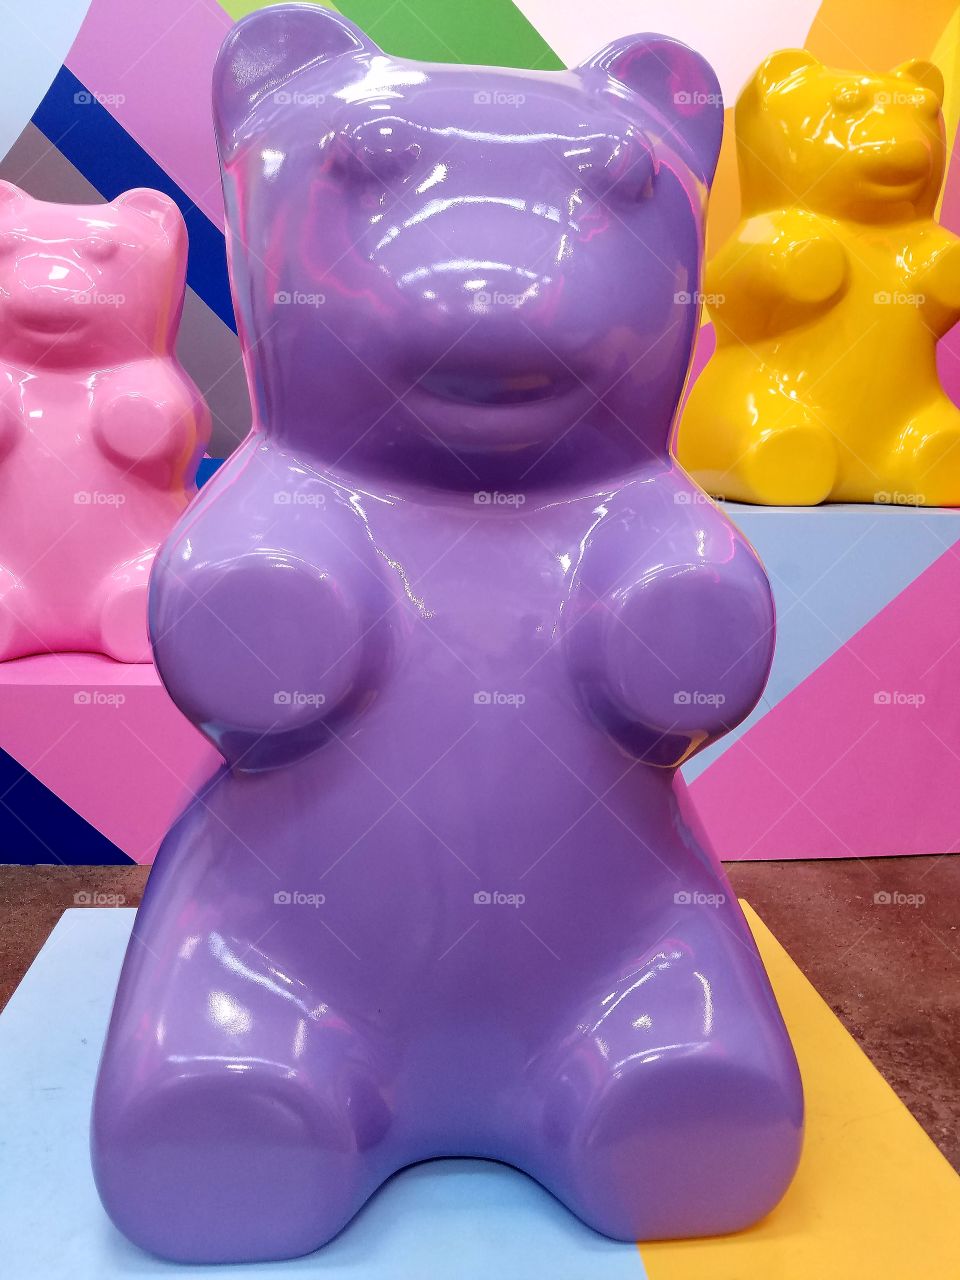 Big colorful toy bears